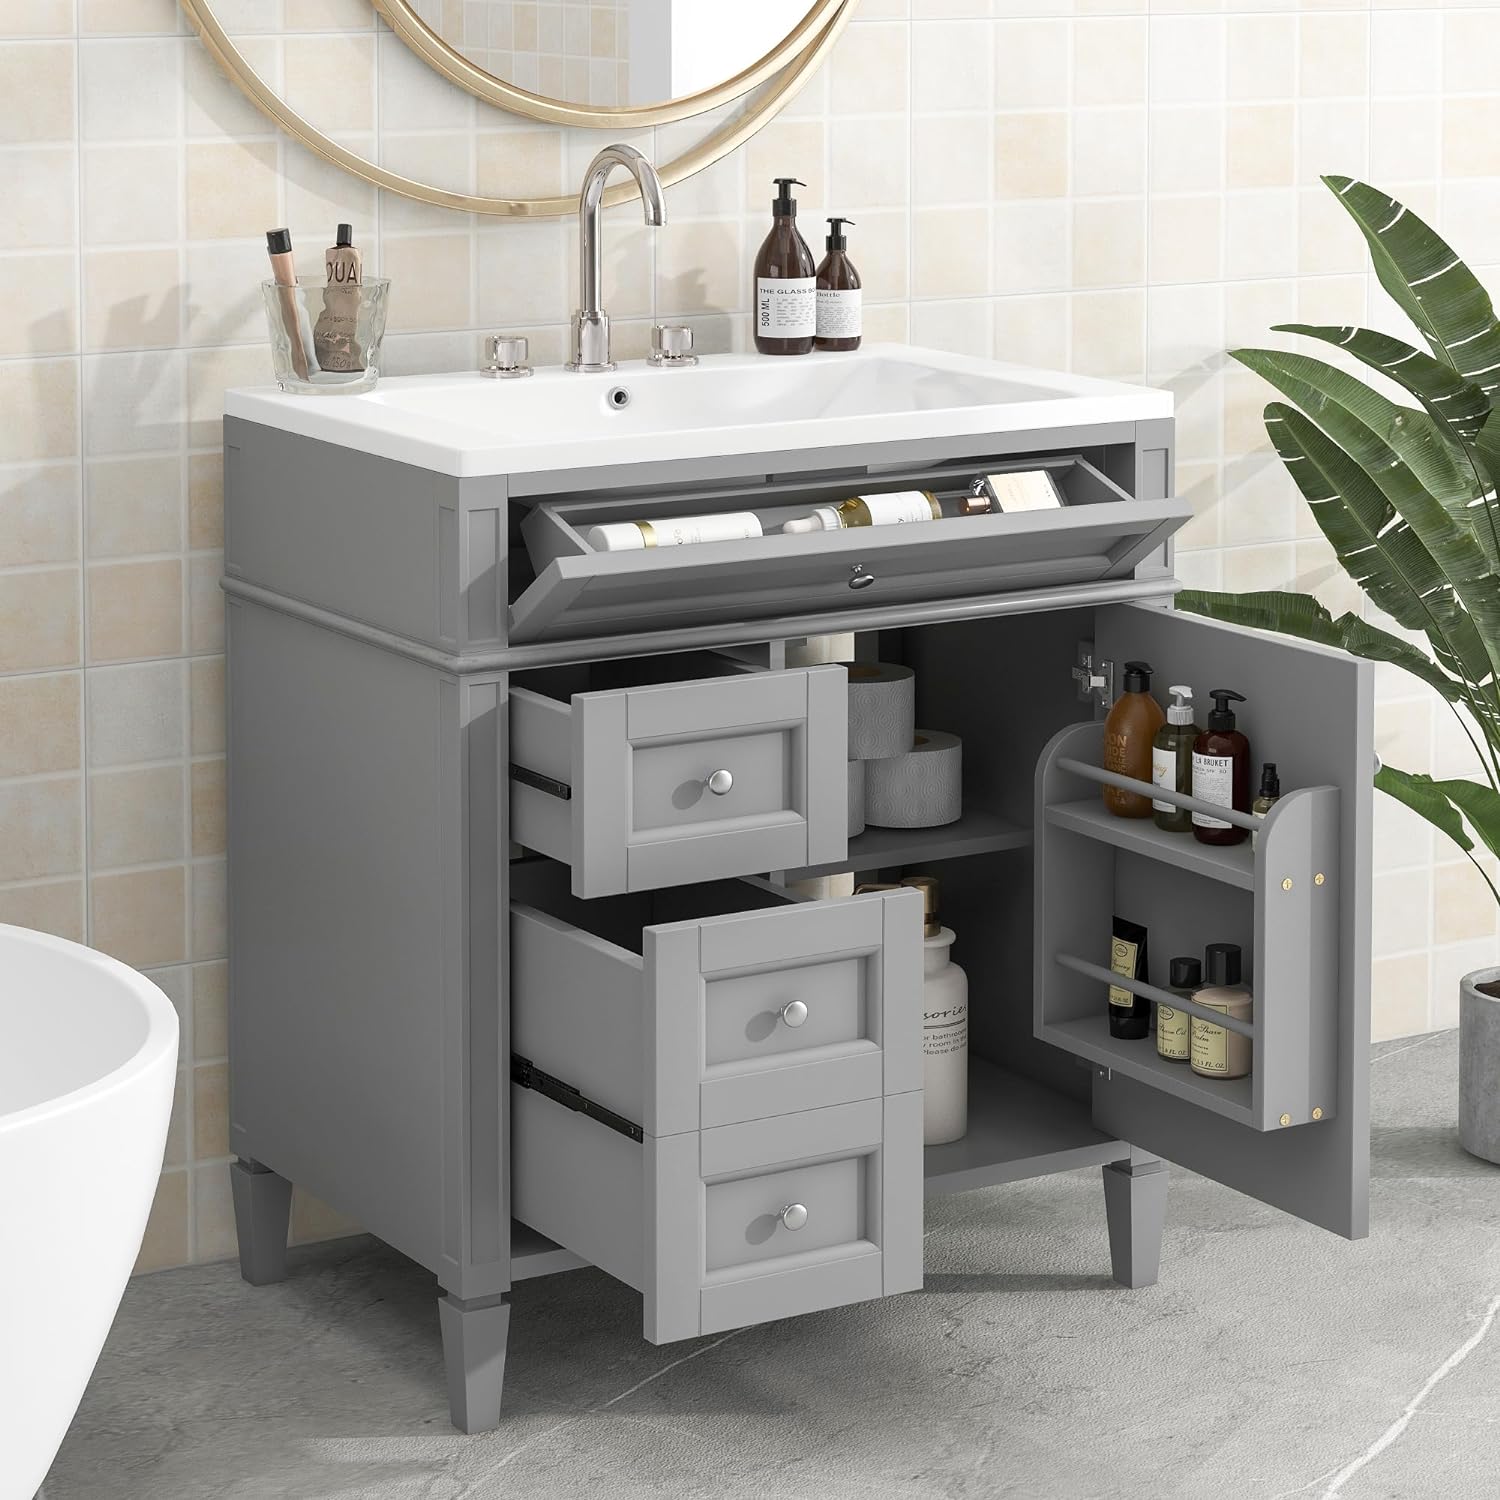 30 Bathroom Vanity with Single Sink Combo, Modern Undermount Bathroom Sink Cabinet with 2 Drawers and a Tip-Out Drawer, Freestanding Bathroom Vanities, Soft Closing, Solid Wood Frame